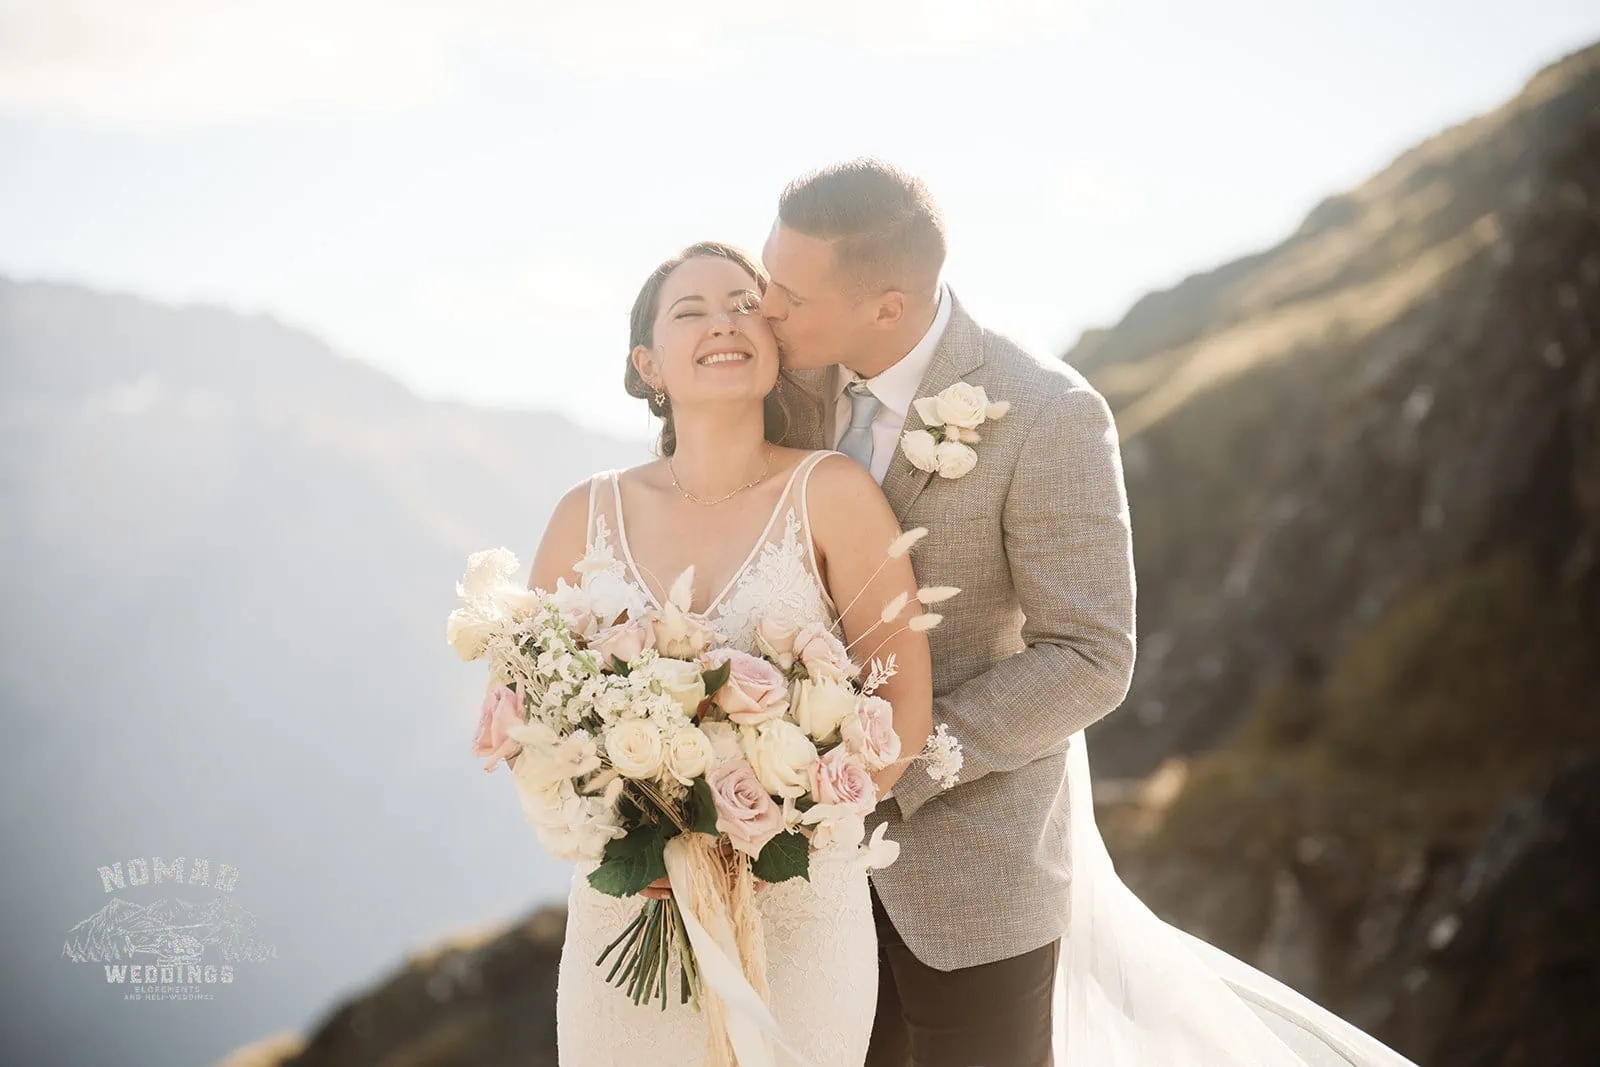 Amy and Eden share an enchanting kiss on the edge of a mountain during their heli elopement wedding in New Zealand.